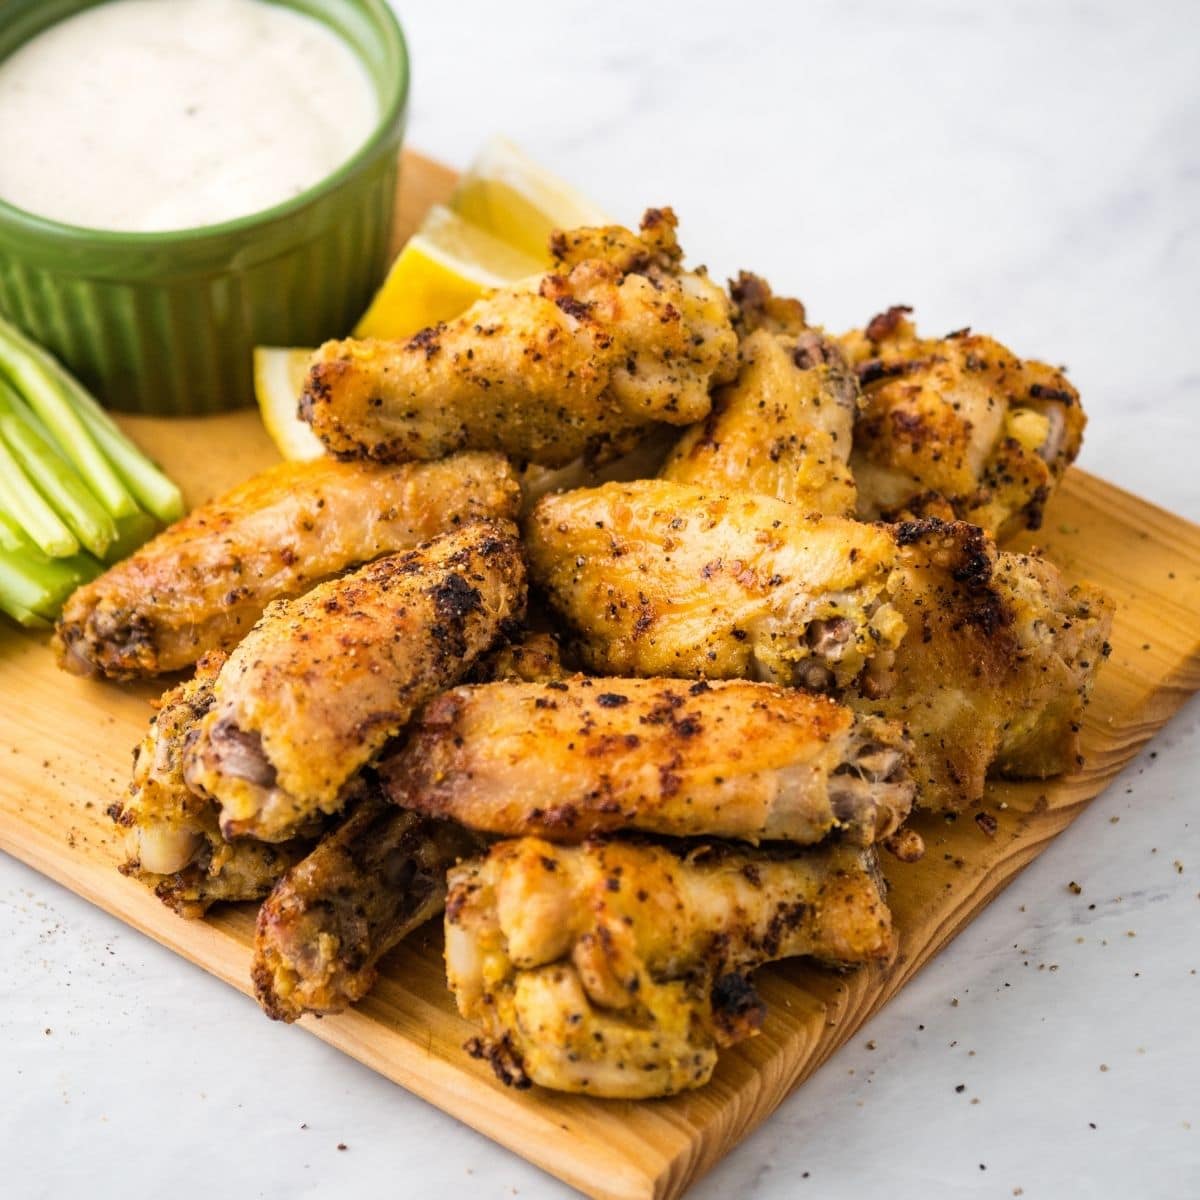 lemon pepper wings on a cutting board ready for serving